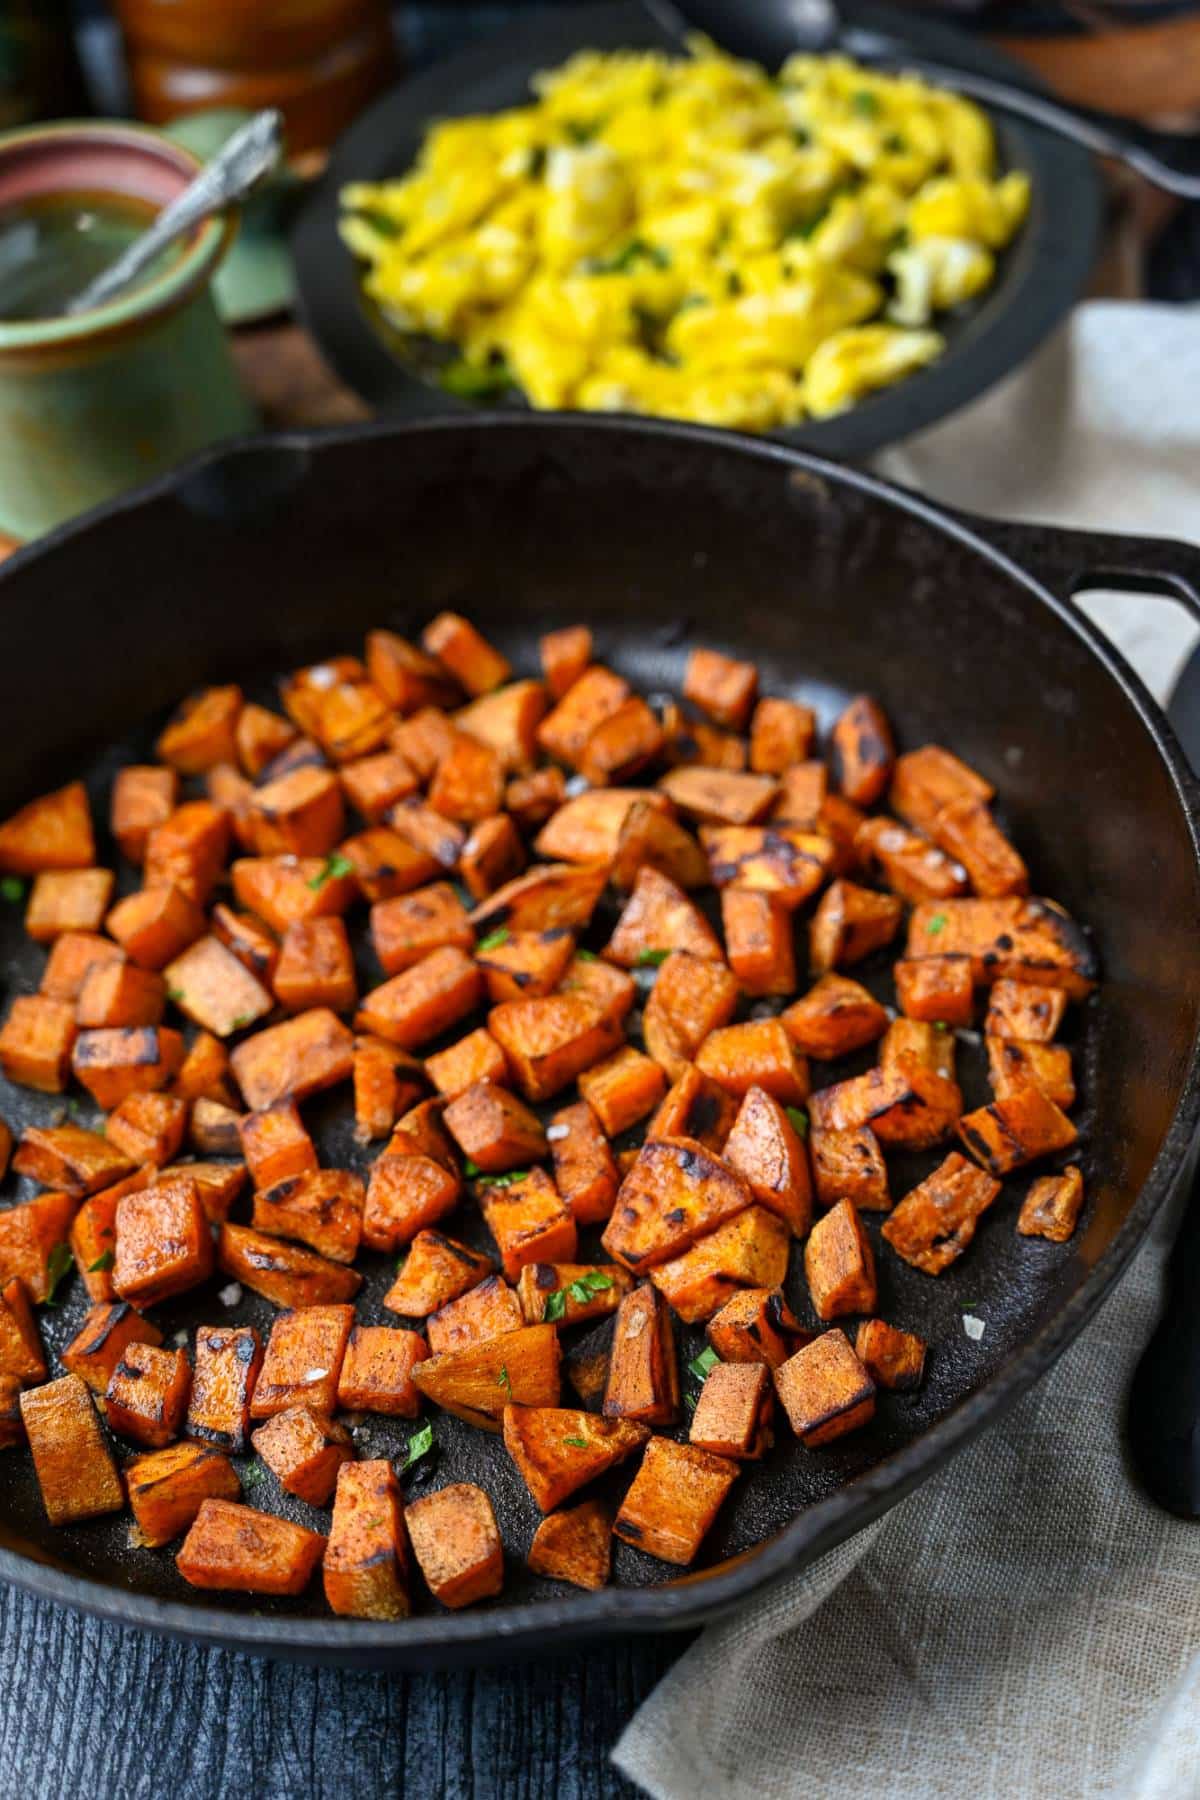 photo of a skillet with fried sweet potatoes and a dish of jalapeno scrambled eggs